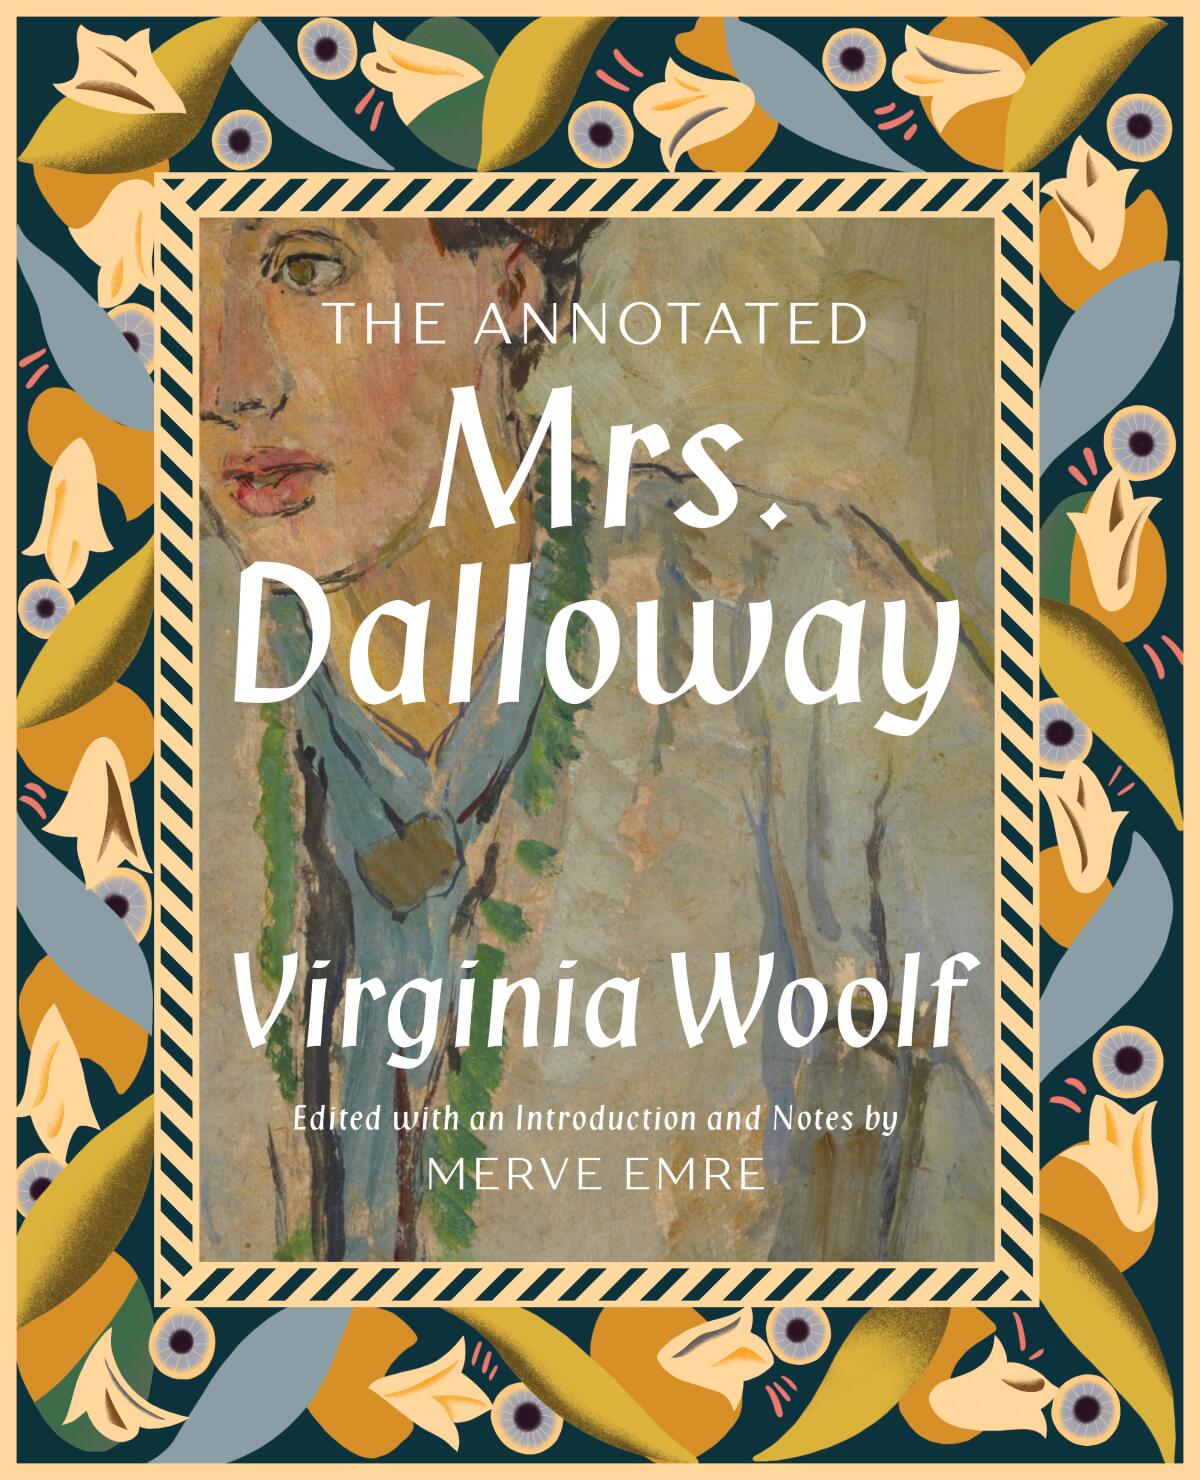 "The Annotated Mrs. Dalloway," by Virginia Woolf and Merve Emre